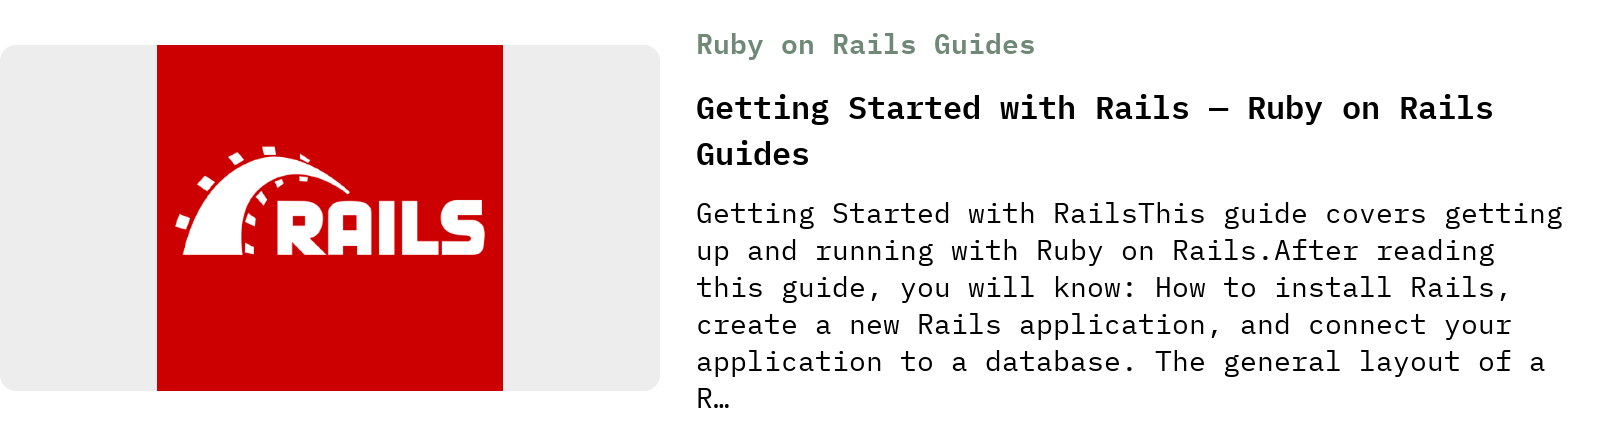 From Ruby on Rails Guides: Getting Started with Rails — Ruby on Rails Guides | Getting Started with RailsThis guide covers getting up and running with Ruby on Rails.After reading this guide, you will know: How to install Rails, create a new Rails application, and connect your application to a database. The general layout of a R…